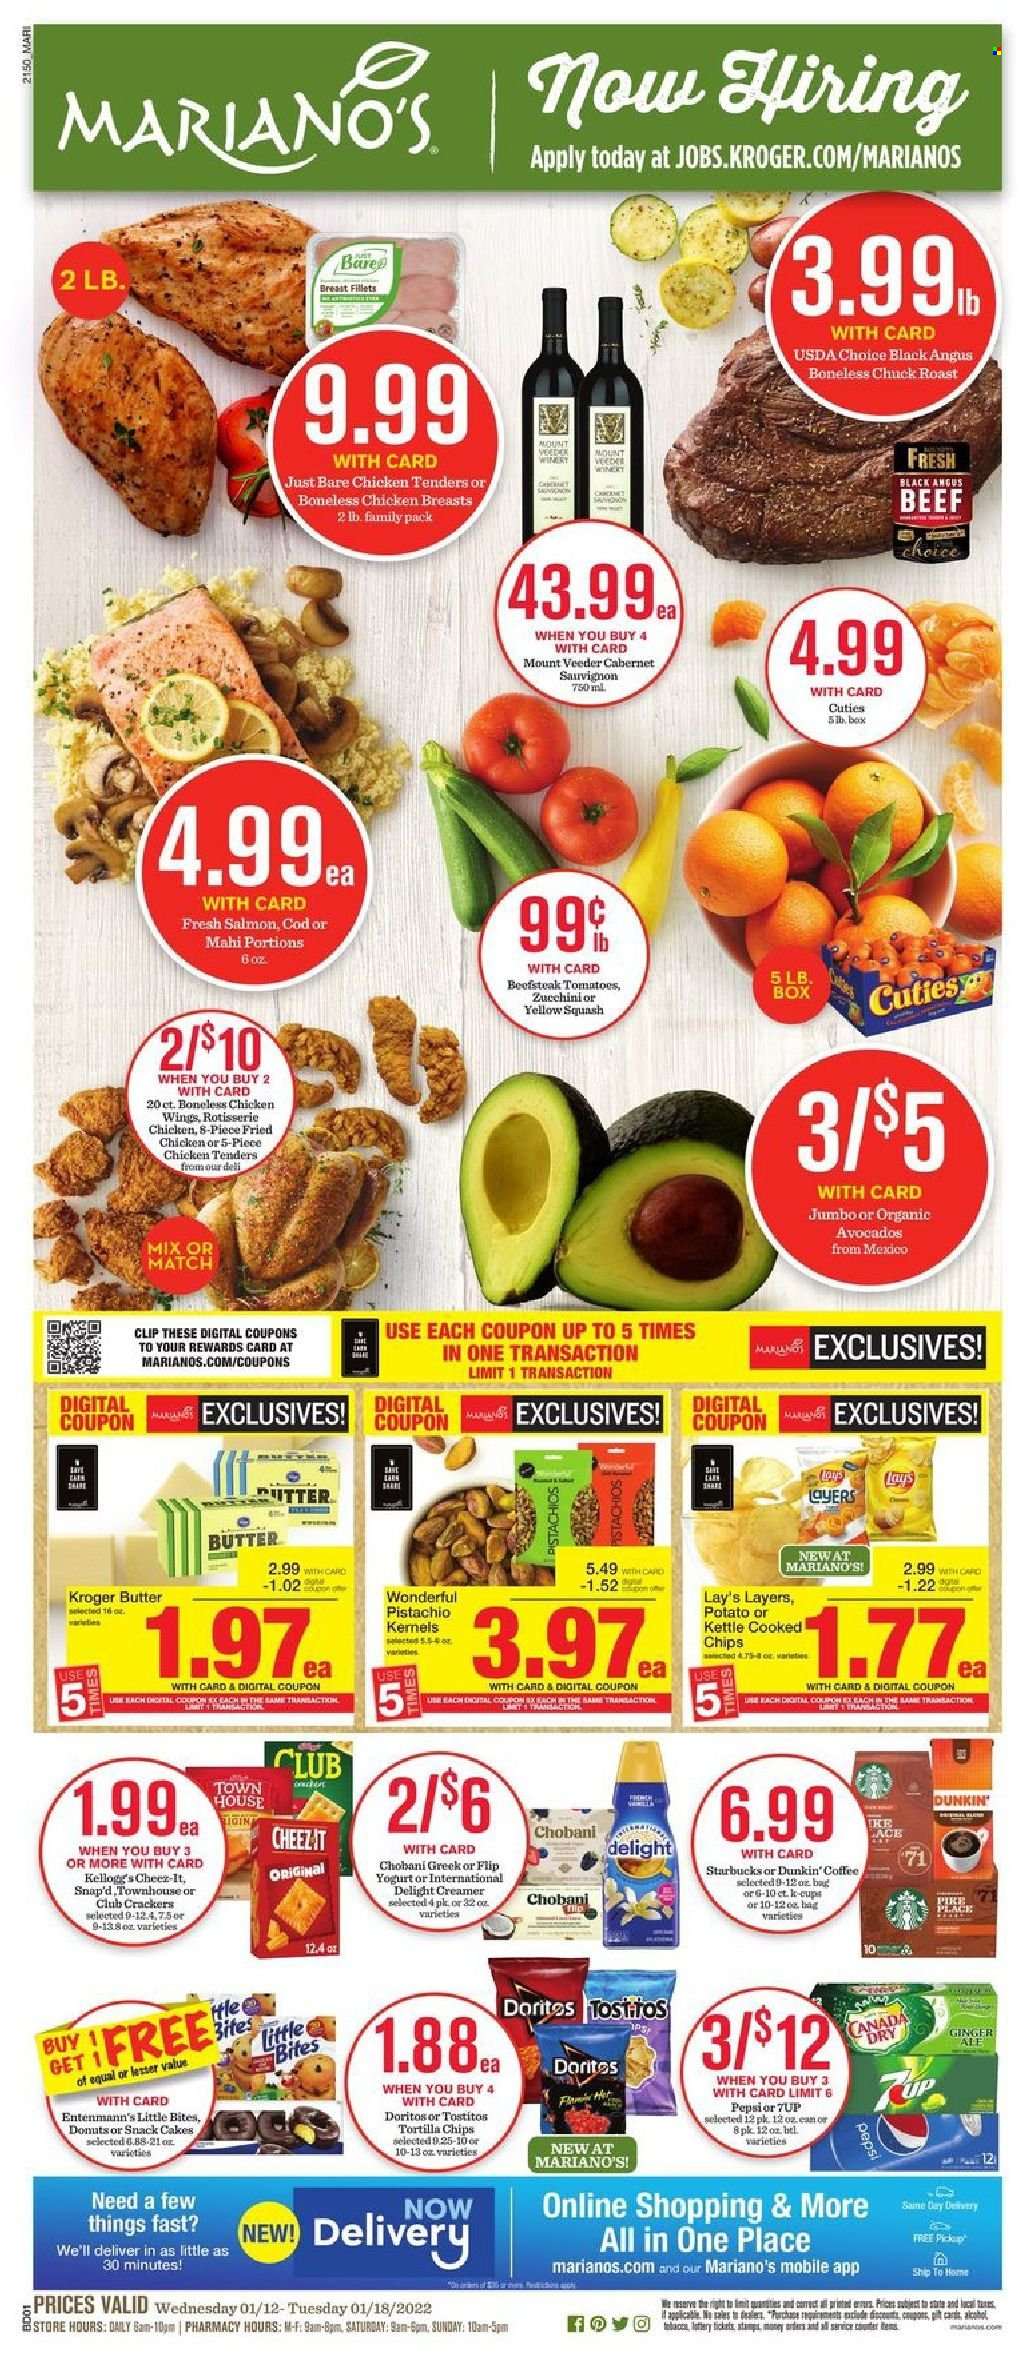 thumbnail - Mariano’s Flyer - 01/12/2022 - 01/18/2022 - Sales products - cake, Ace, Entenmann's, yellow squash, avocado, cod, salmon, chicken roast, chicken tenders, fried chicken, yoghurt, Chobani, butter, creamer, chicken wings, crackers, Kellogg's, Little Bites, Doritos, tortilla chips, chips, Lay’s, Cheez-It, Tostitos, pistachios, Canada Dry, ginger ale, coffee, Starbucks, coffee capsules, L'Or, K-Cups, Cabernet Sauvignon, red wine, wine, alcohol, chicken breasts, beef meat, chuck roast. Page 1.